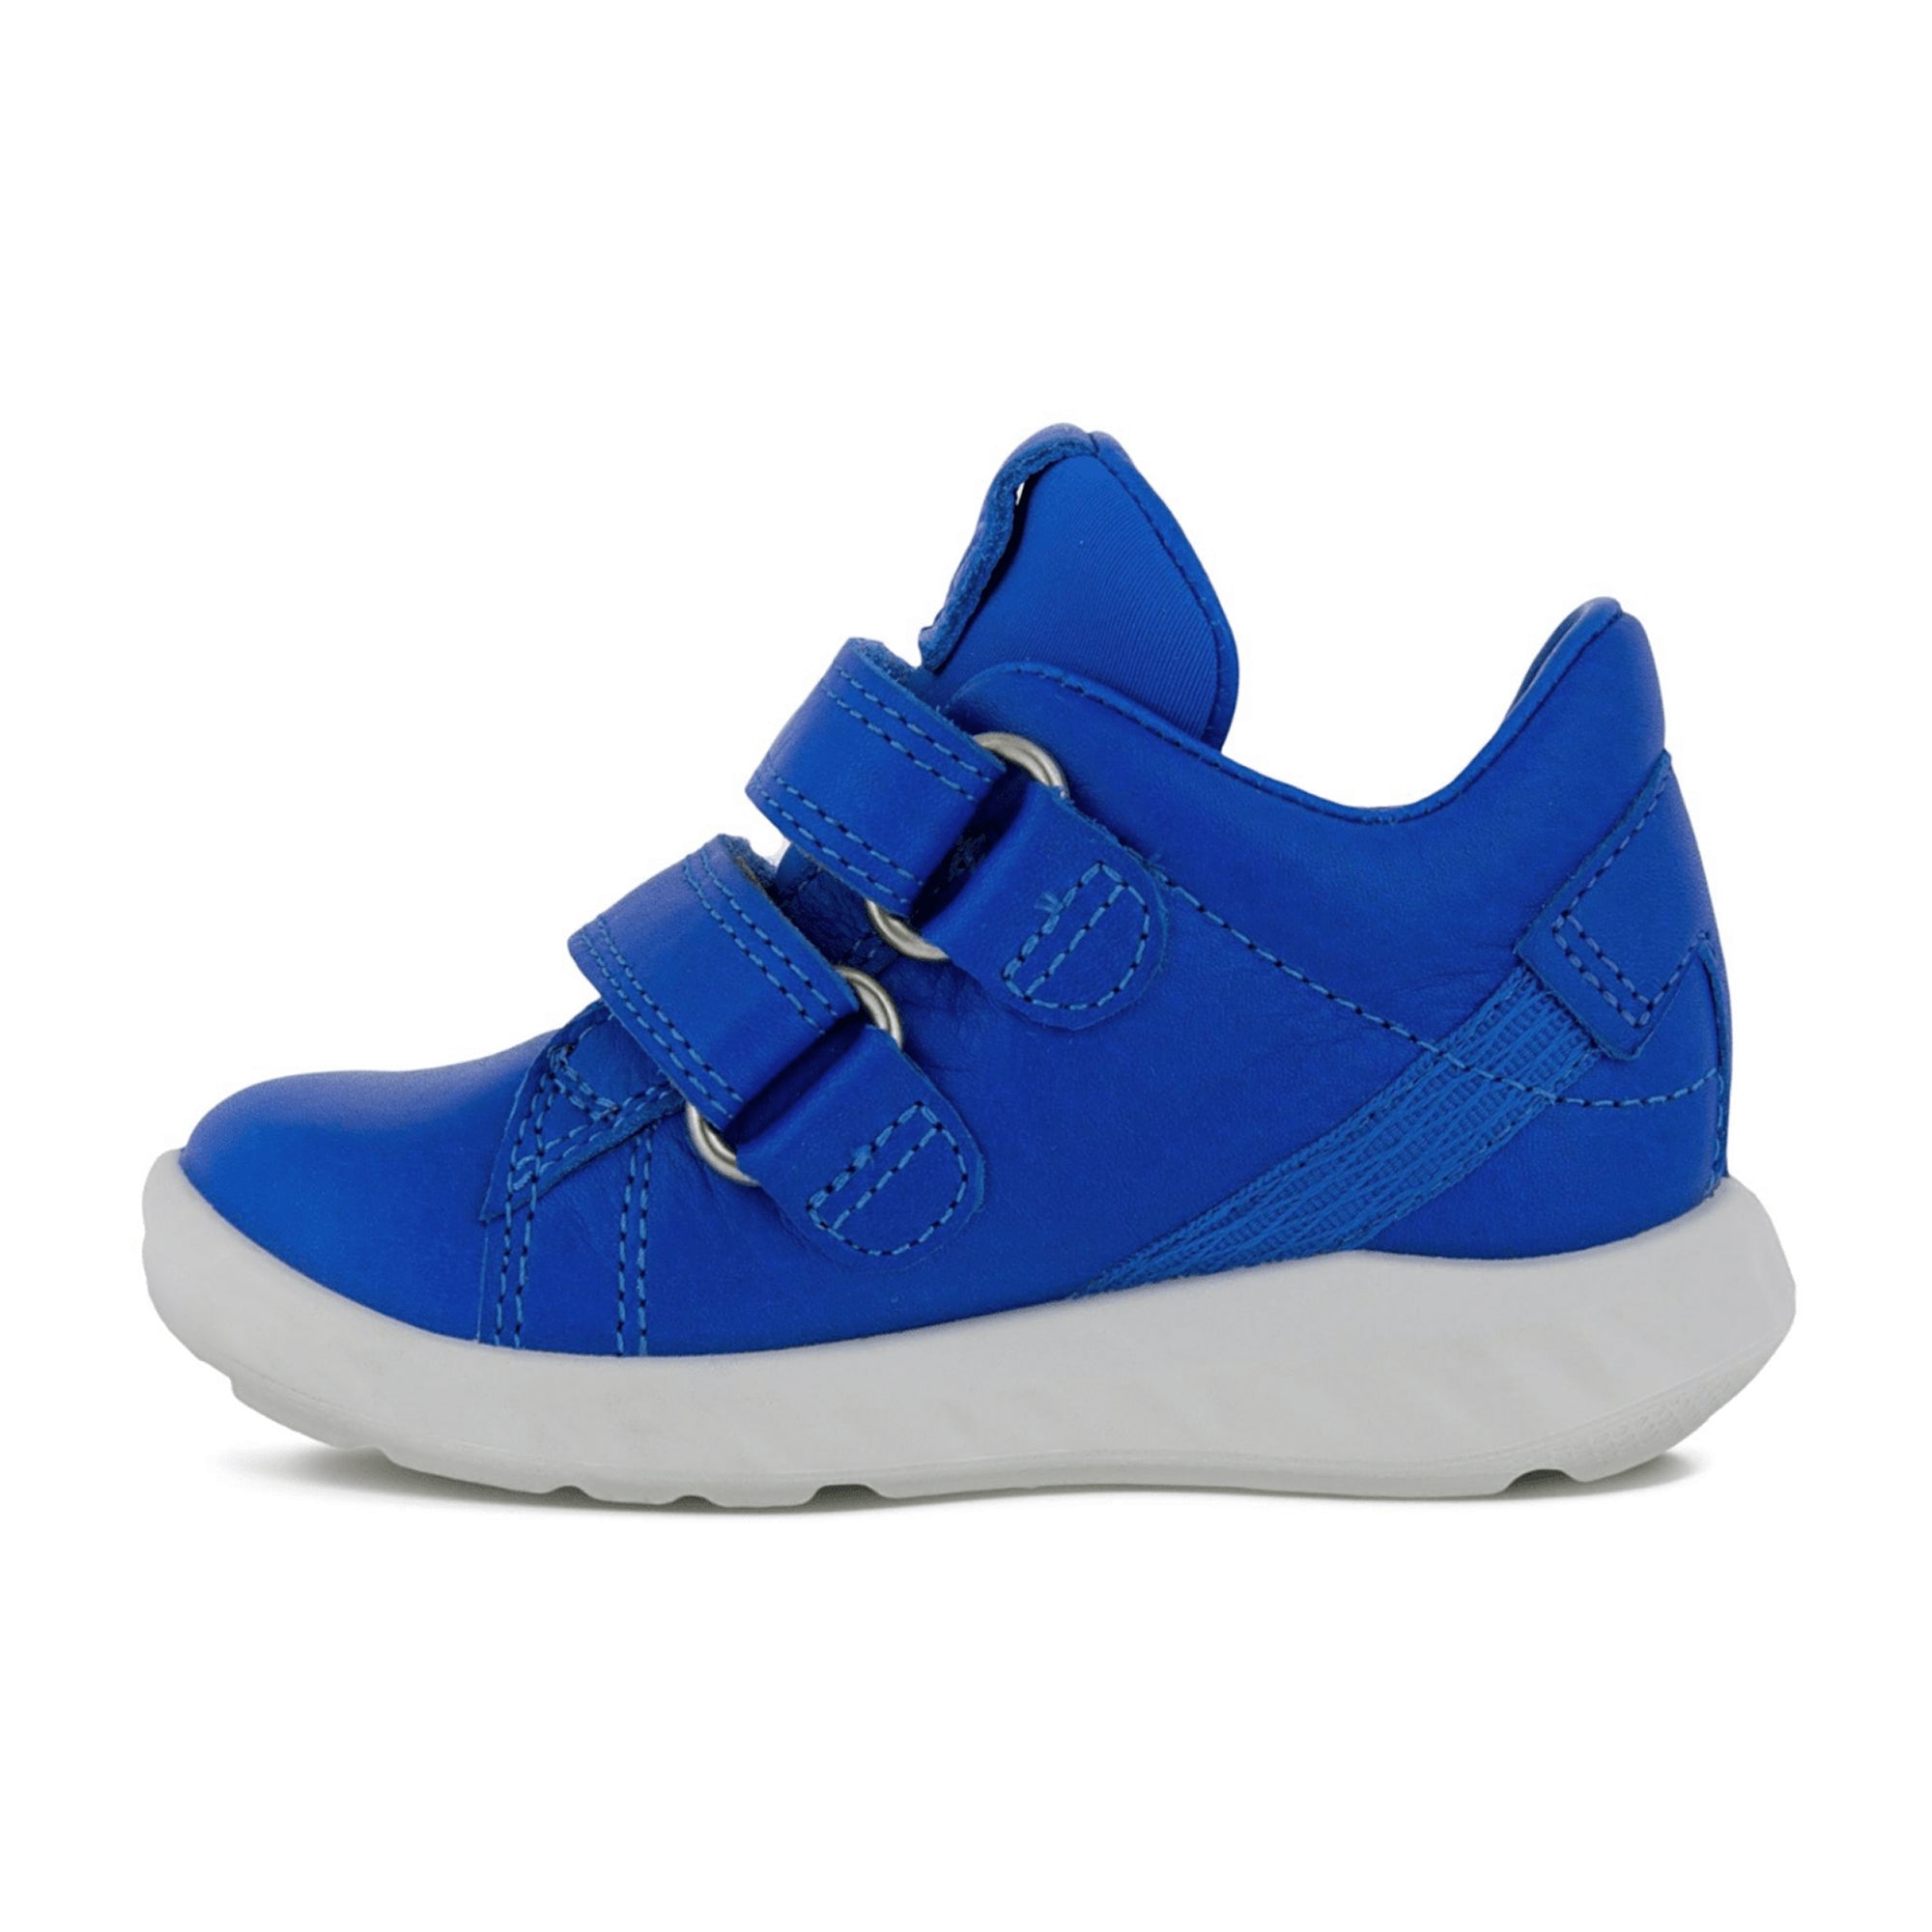 Ecco SP1 Lite In Kids Sneakers - Durable & Stylish Blue Shoes